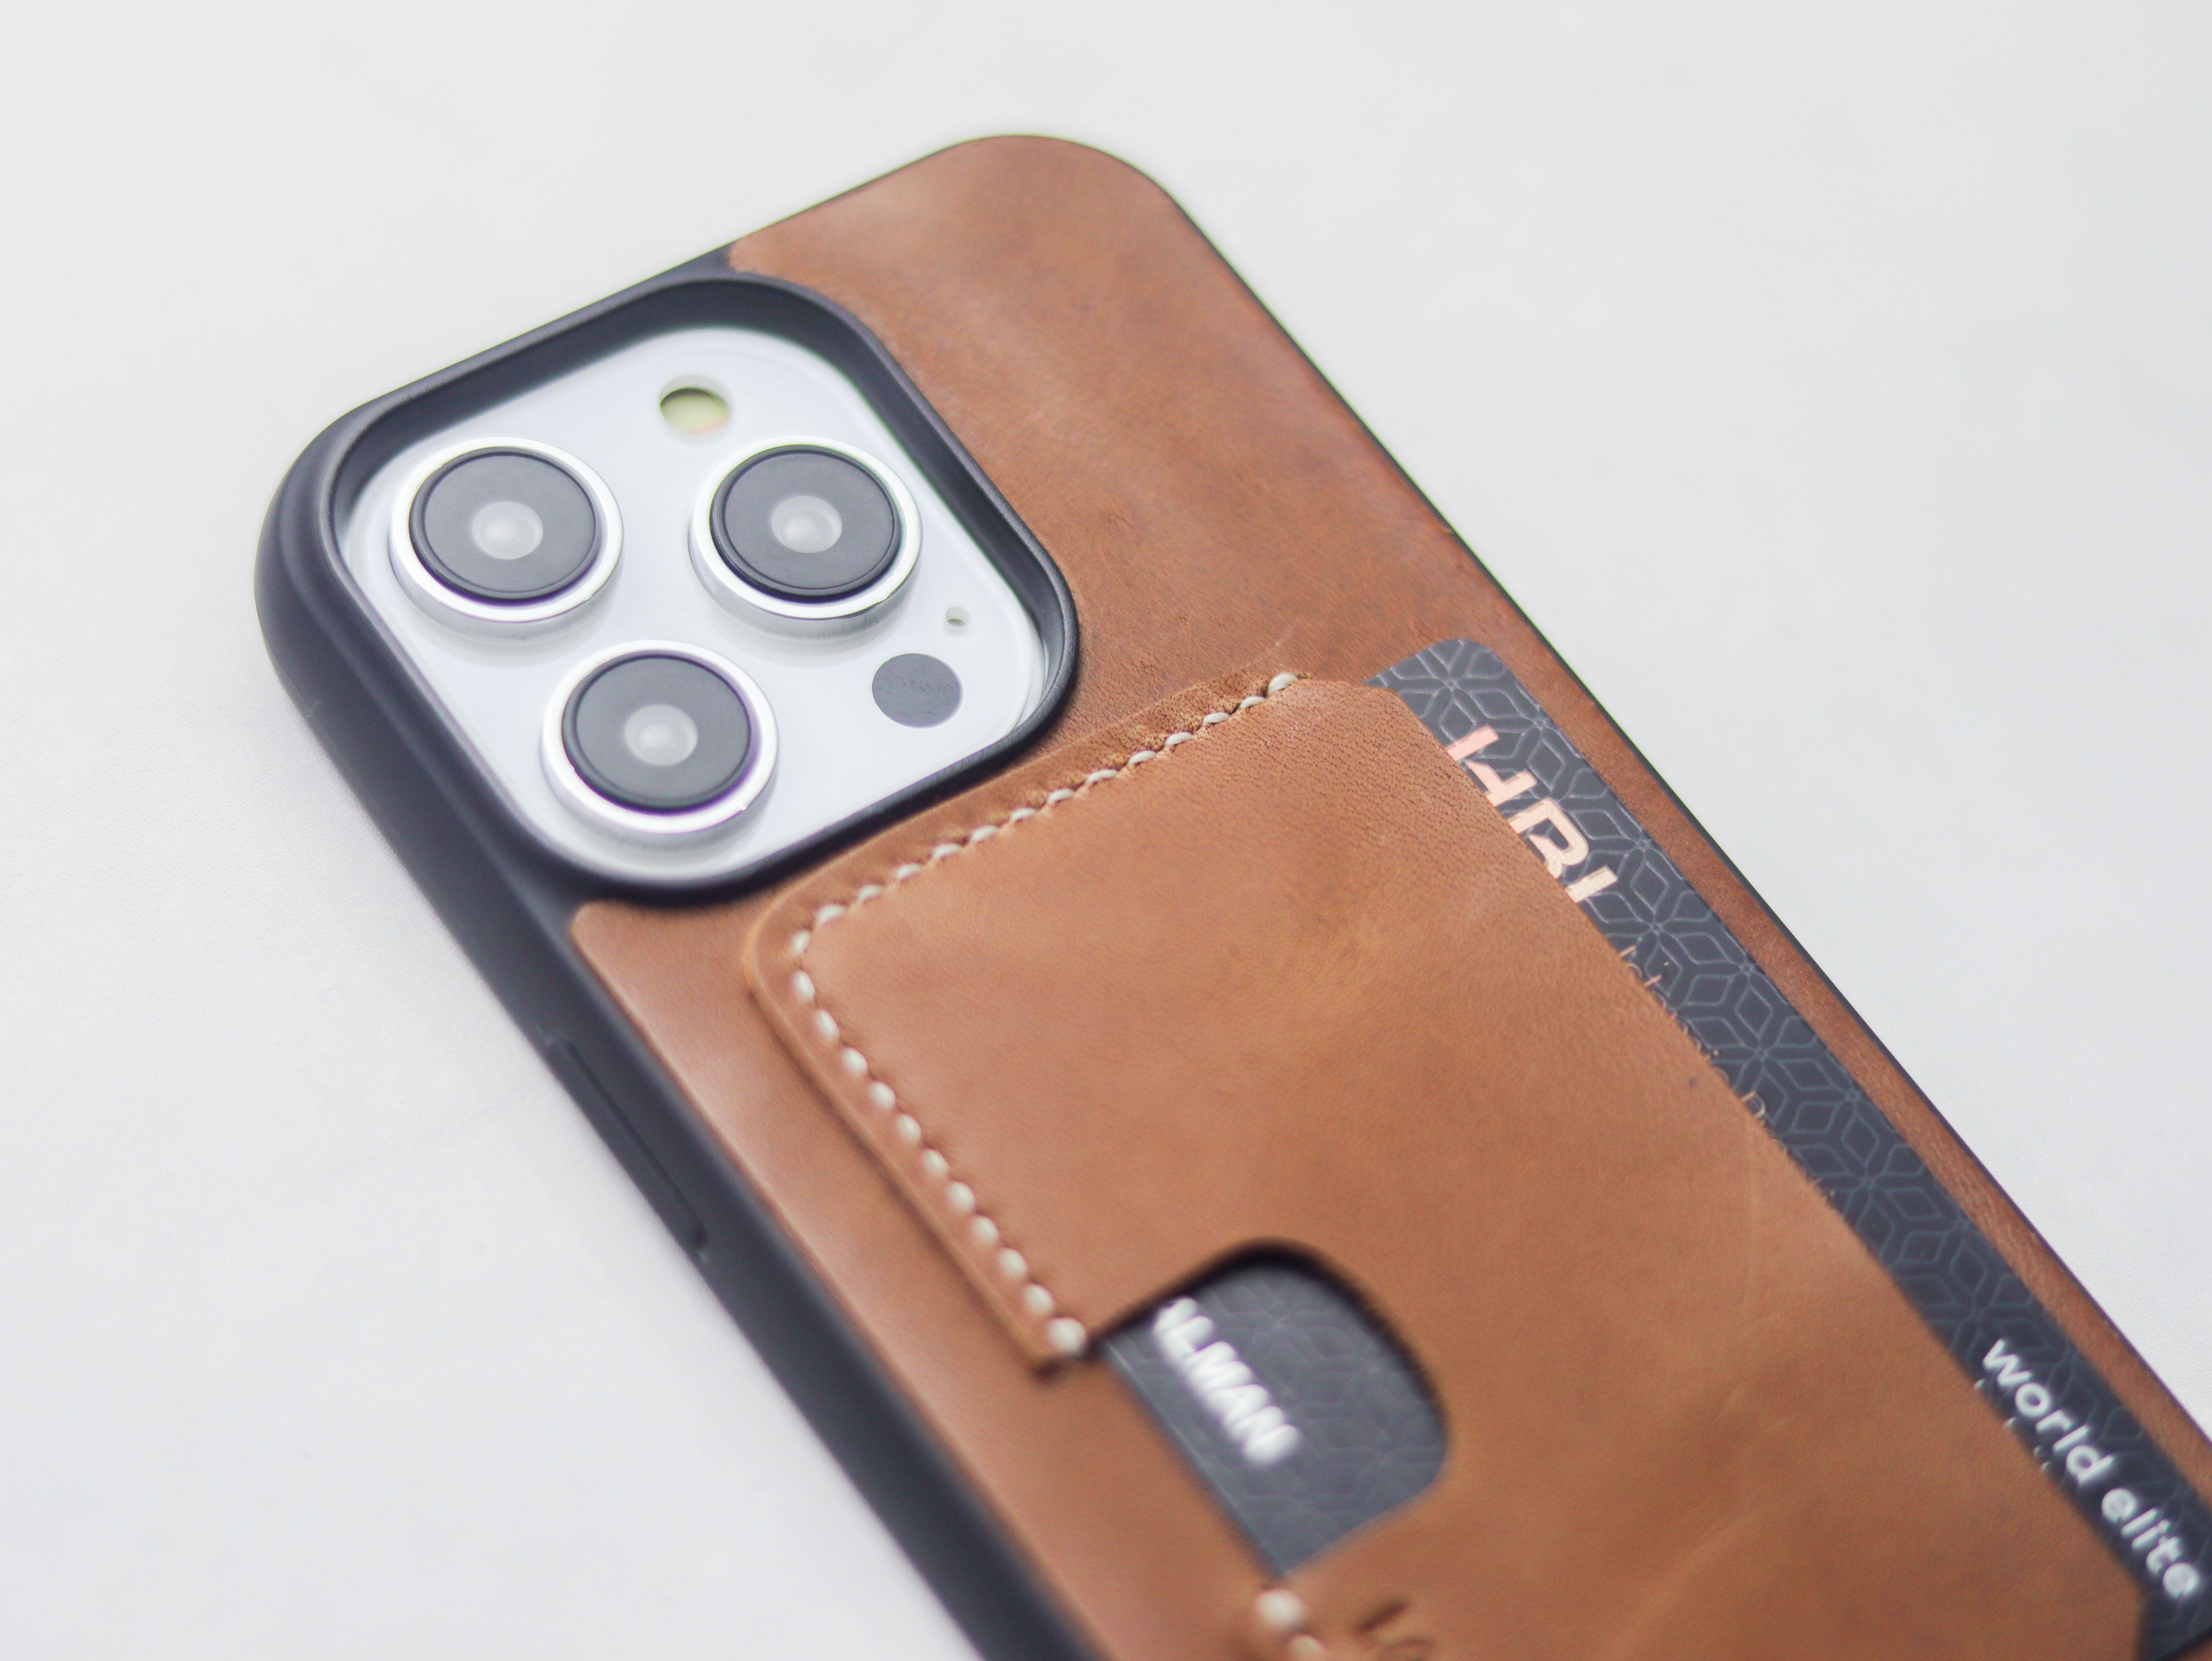 CARAMEL BROWN LEATHER - WALLET PHONE CASE